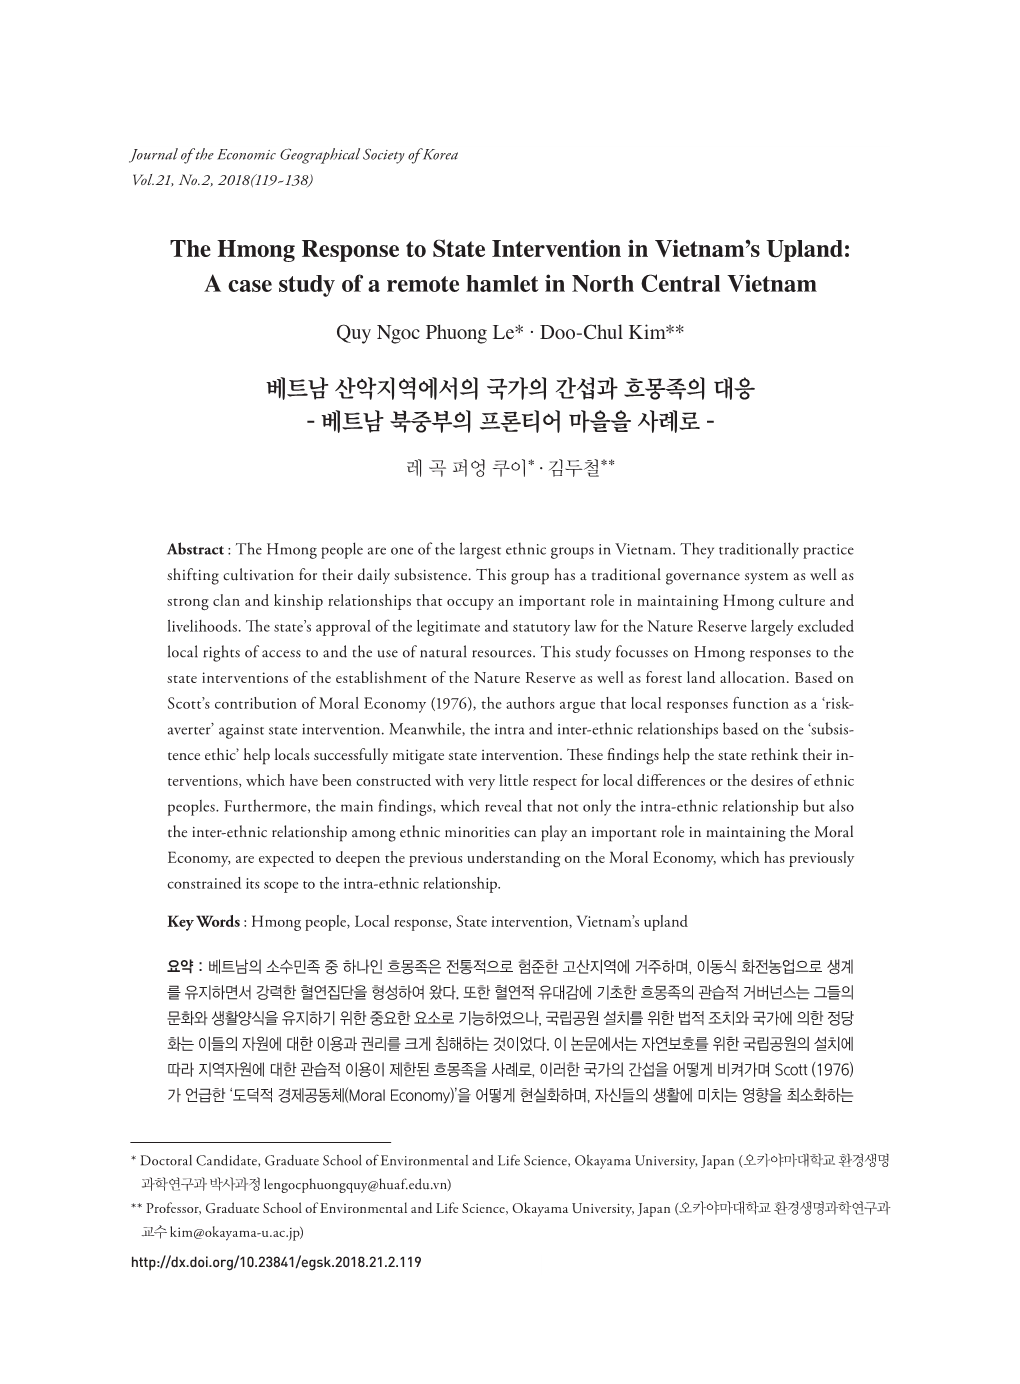 The Hmong Response to State Intervention in Vietnam's Upland